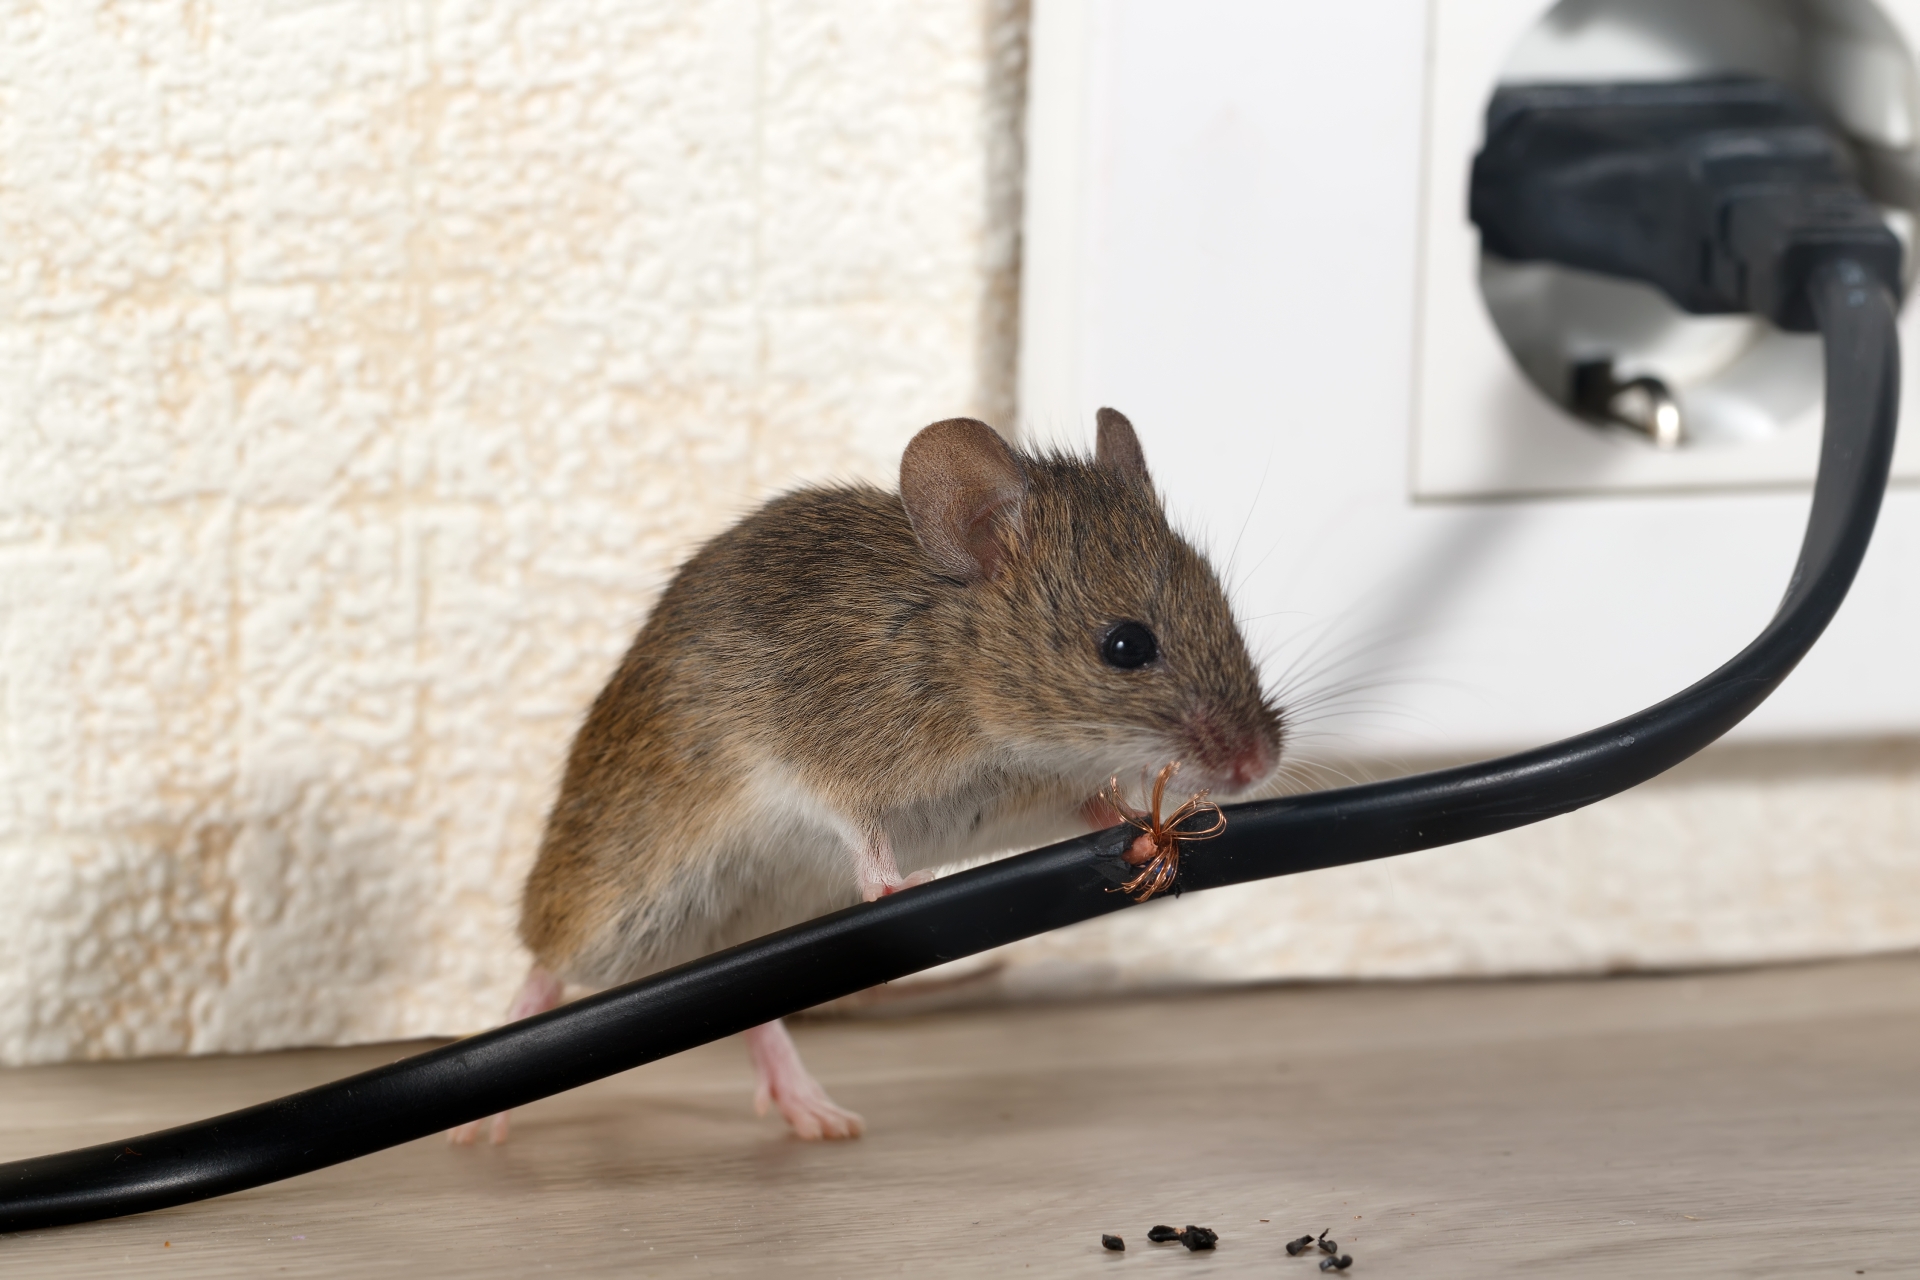 Mice Infestation, Pest Control in Wandsworth, SW18. Call Now 020 8166 9746